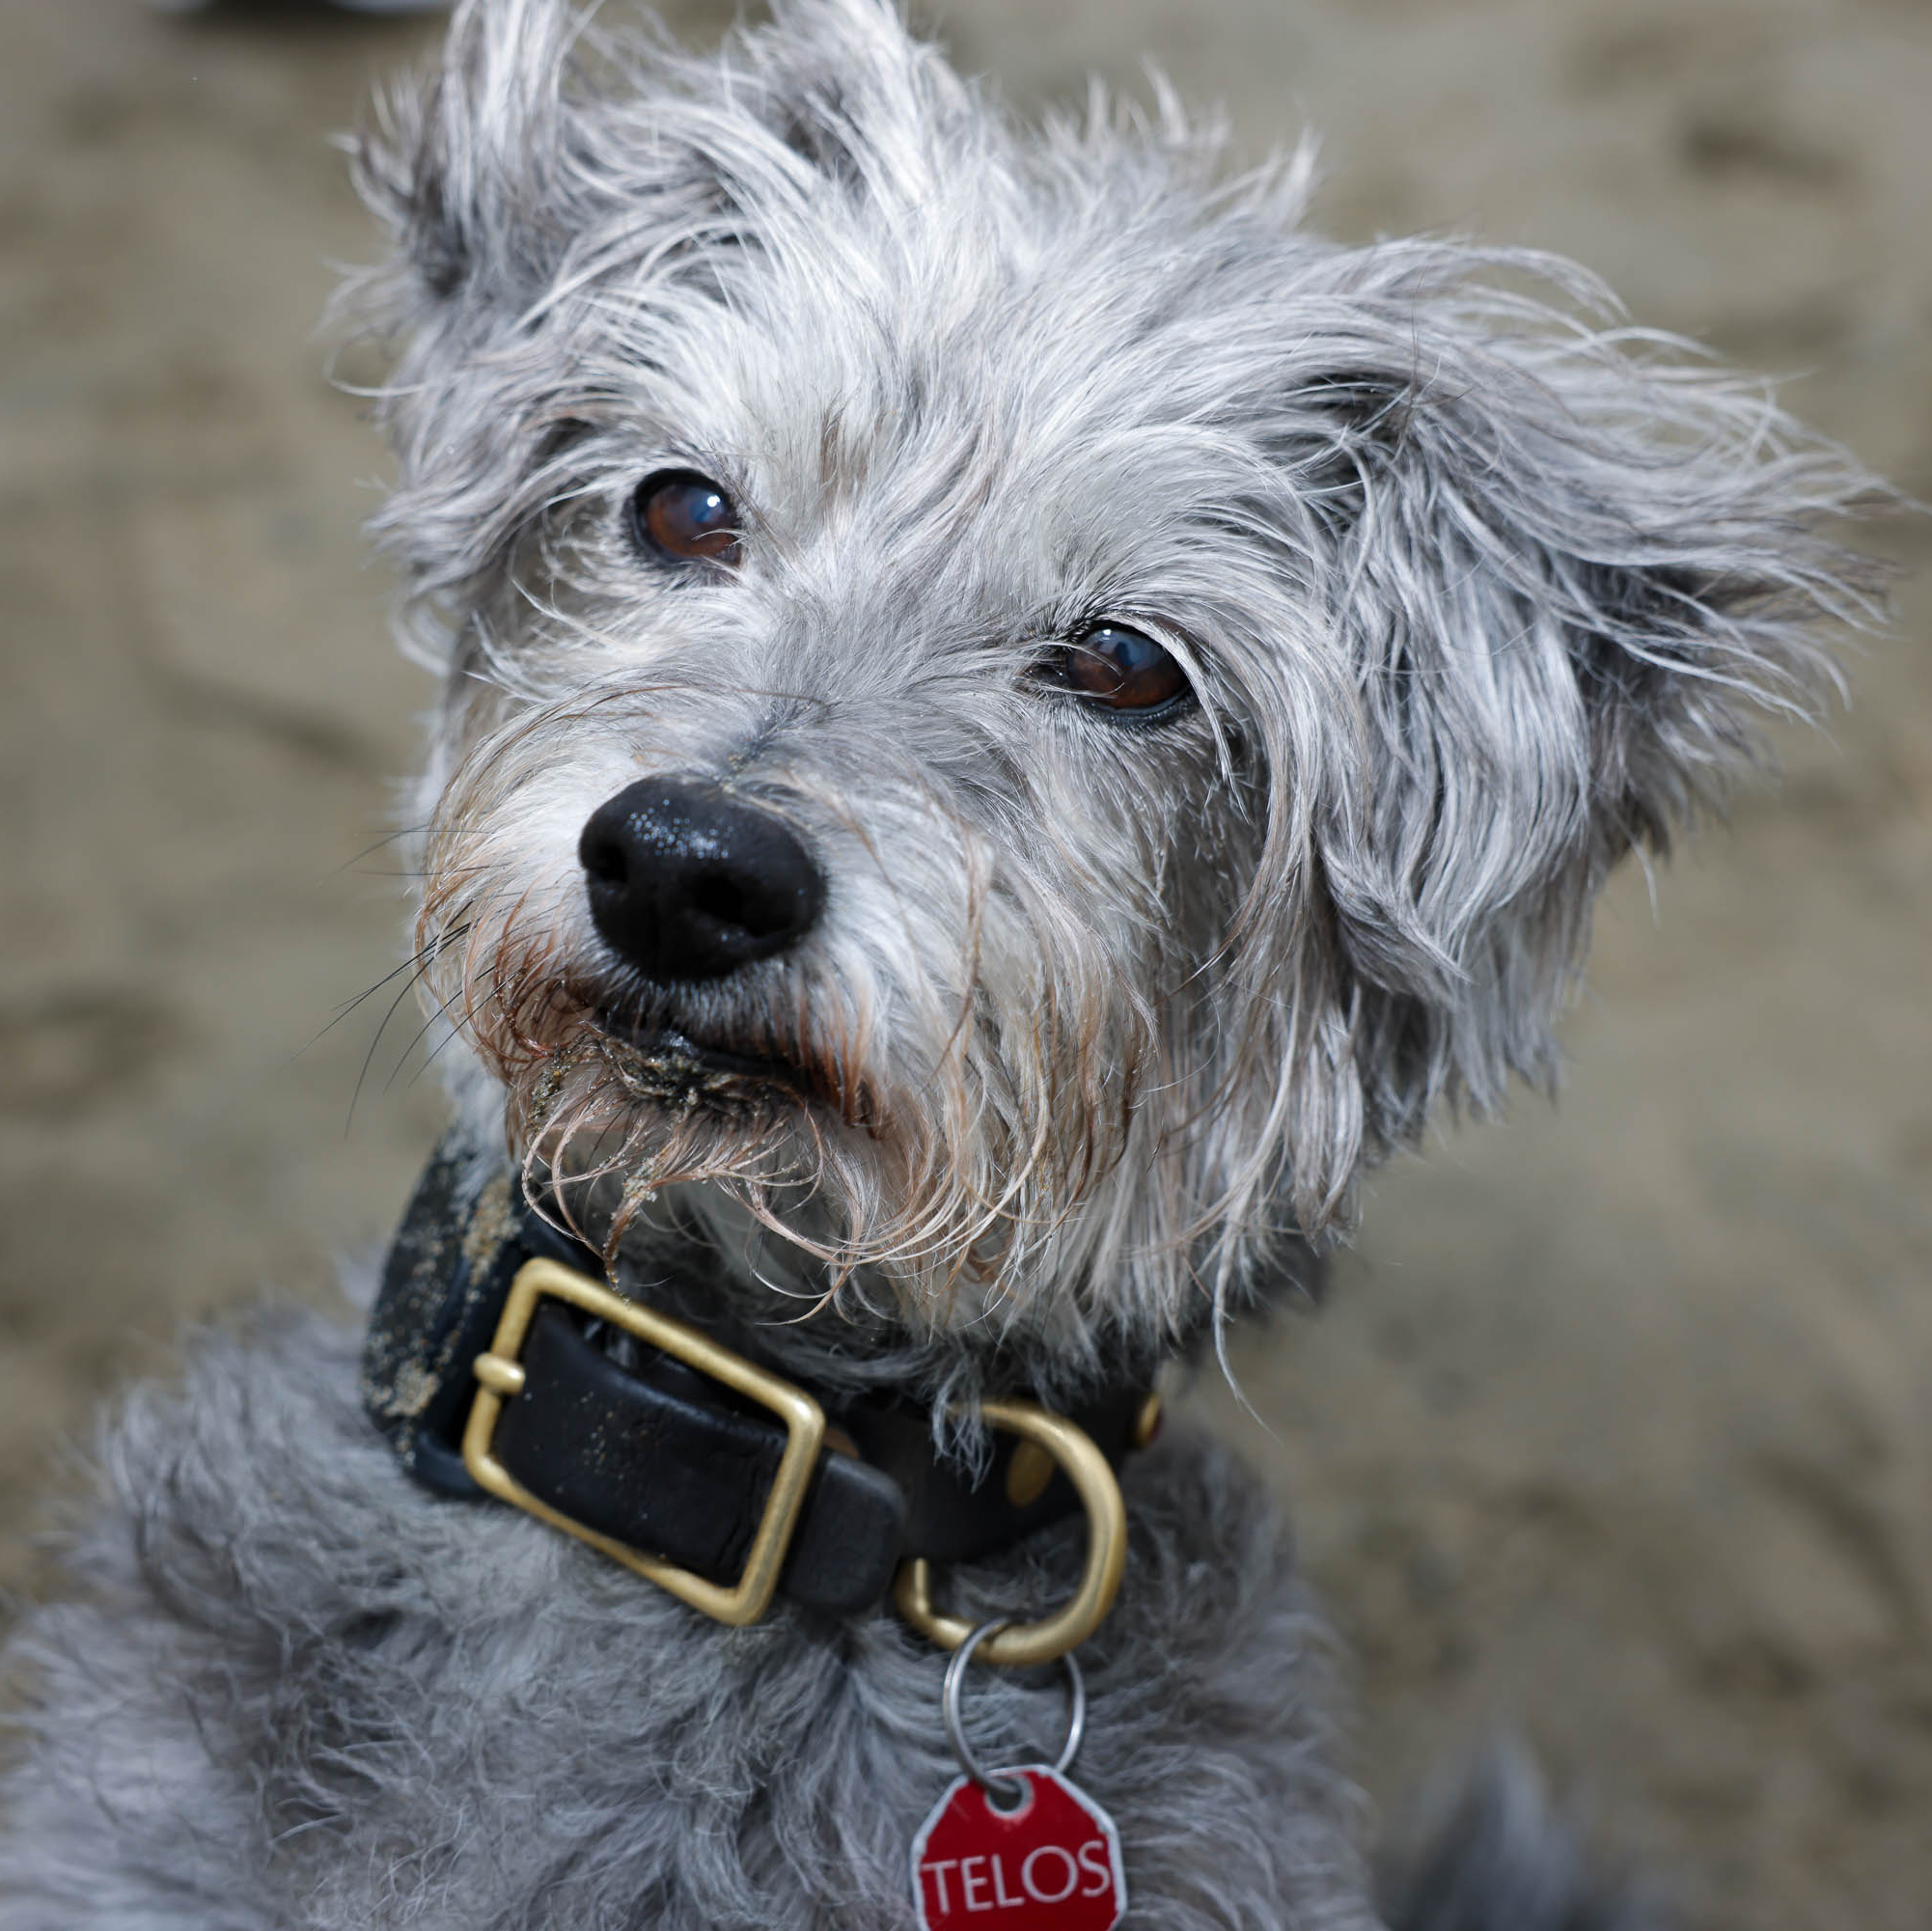 A grey, wiry-furred dog with wise brown eyes and a collar, looking intently at the camera.